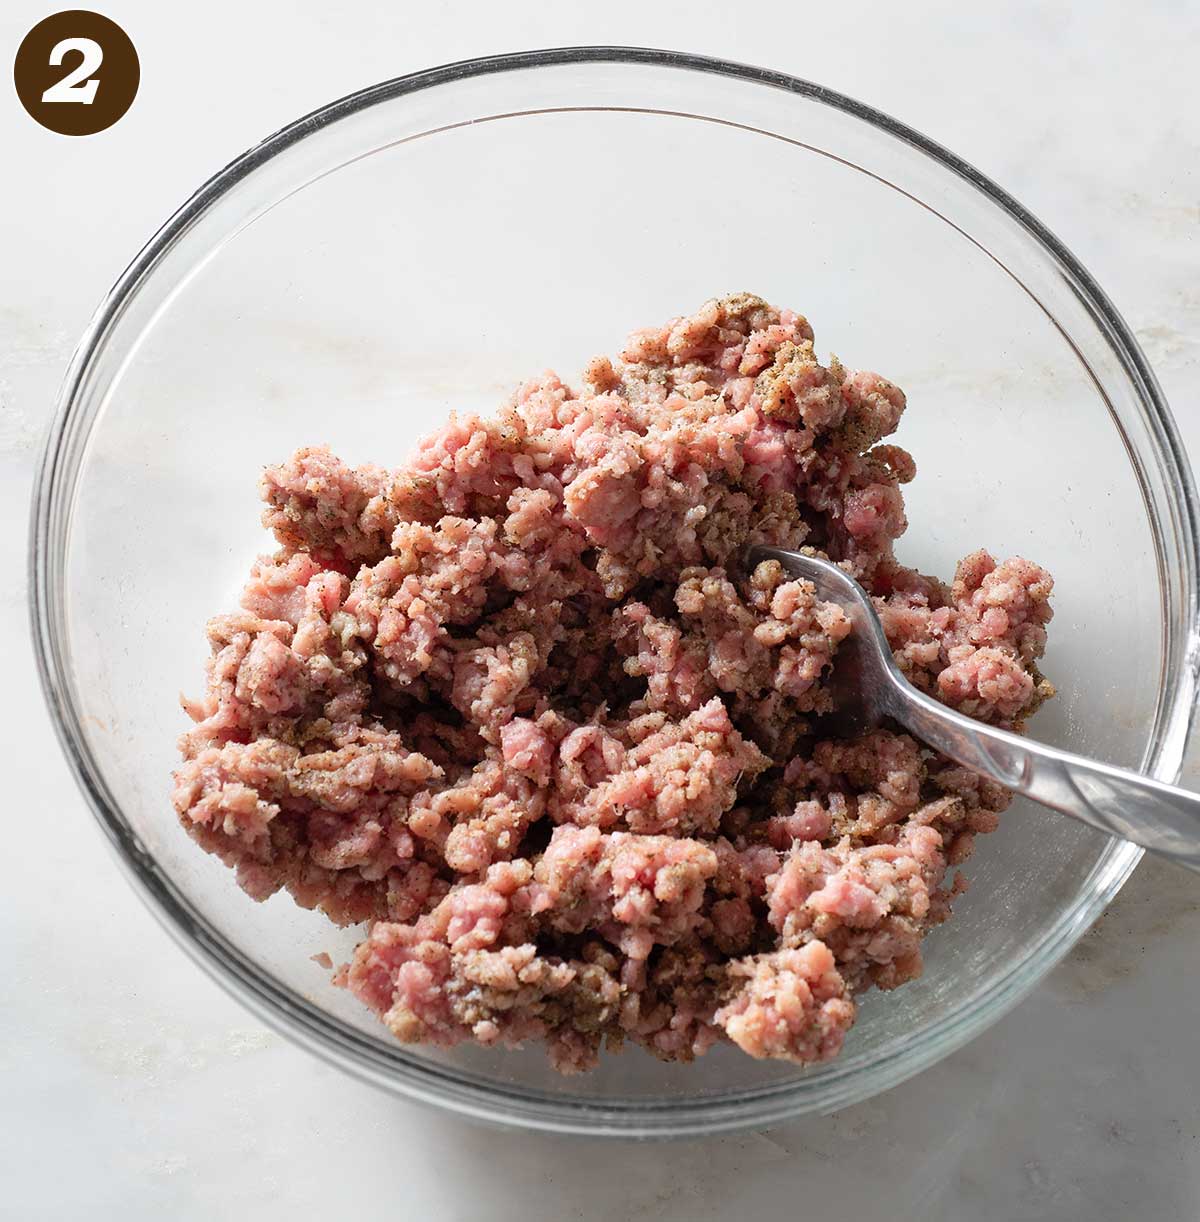 Sausage meat and seasoning being mixed in a bowl.